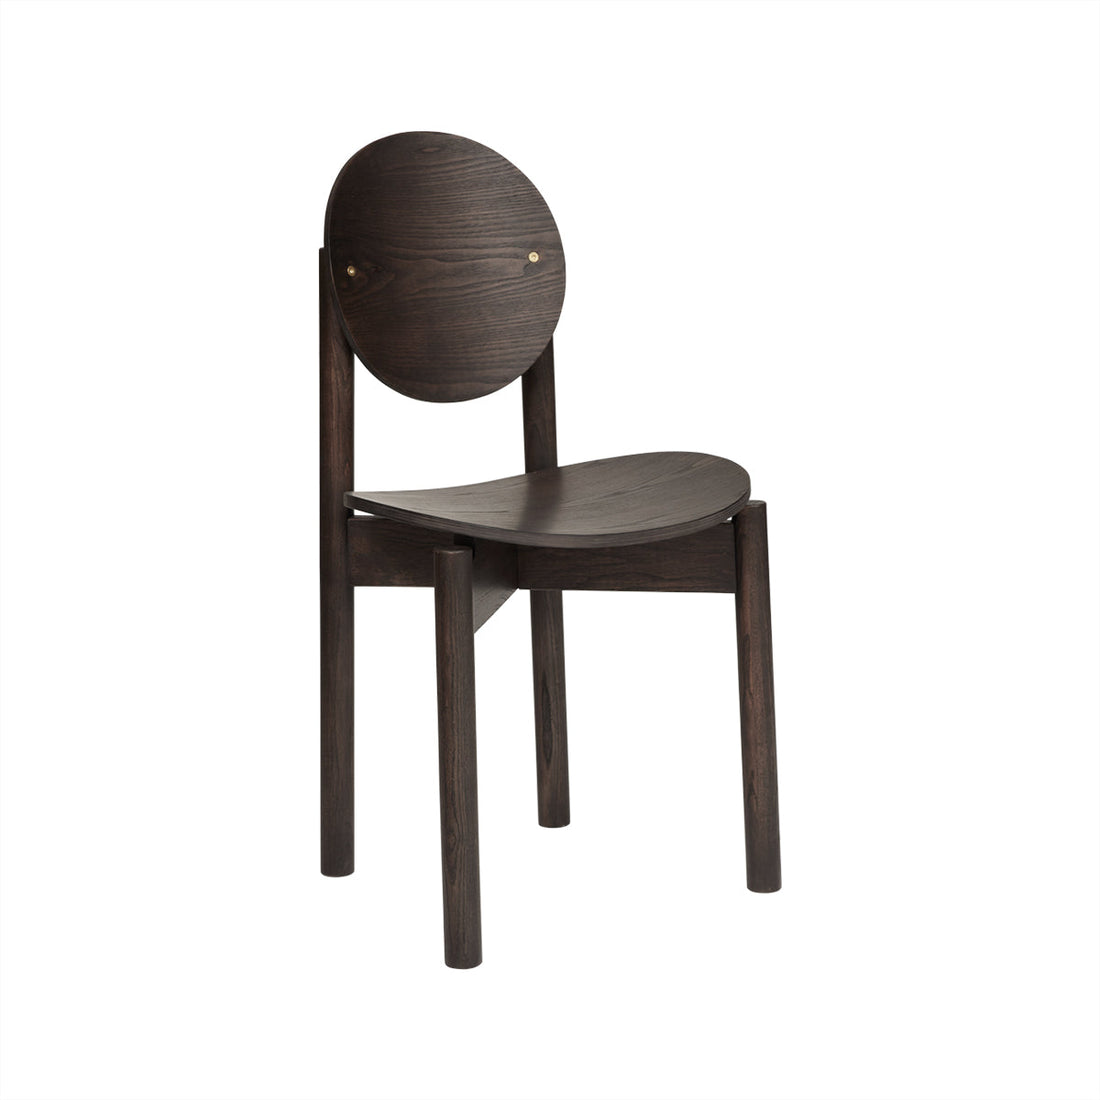 Oyoy Living Oy Dining Table Chair